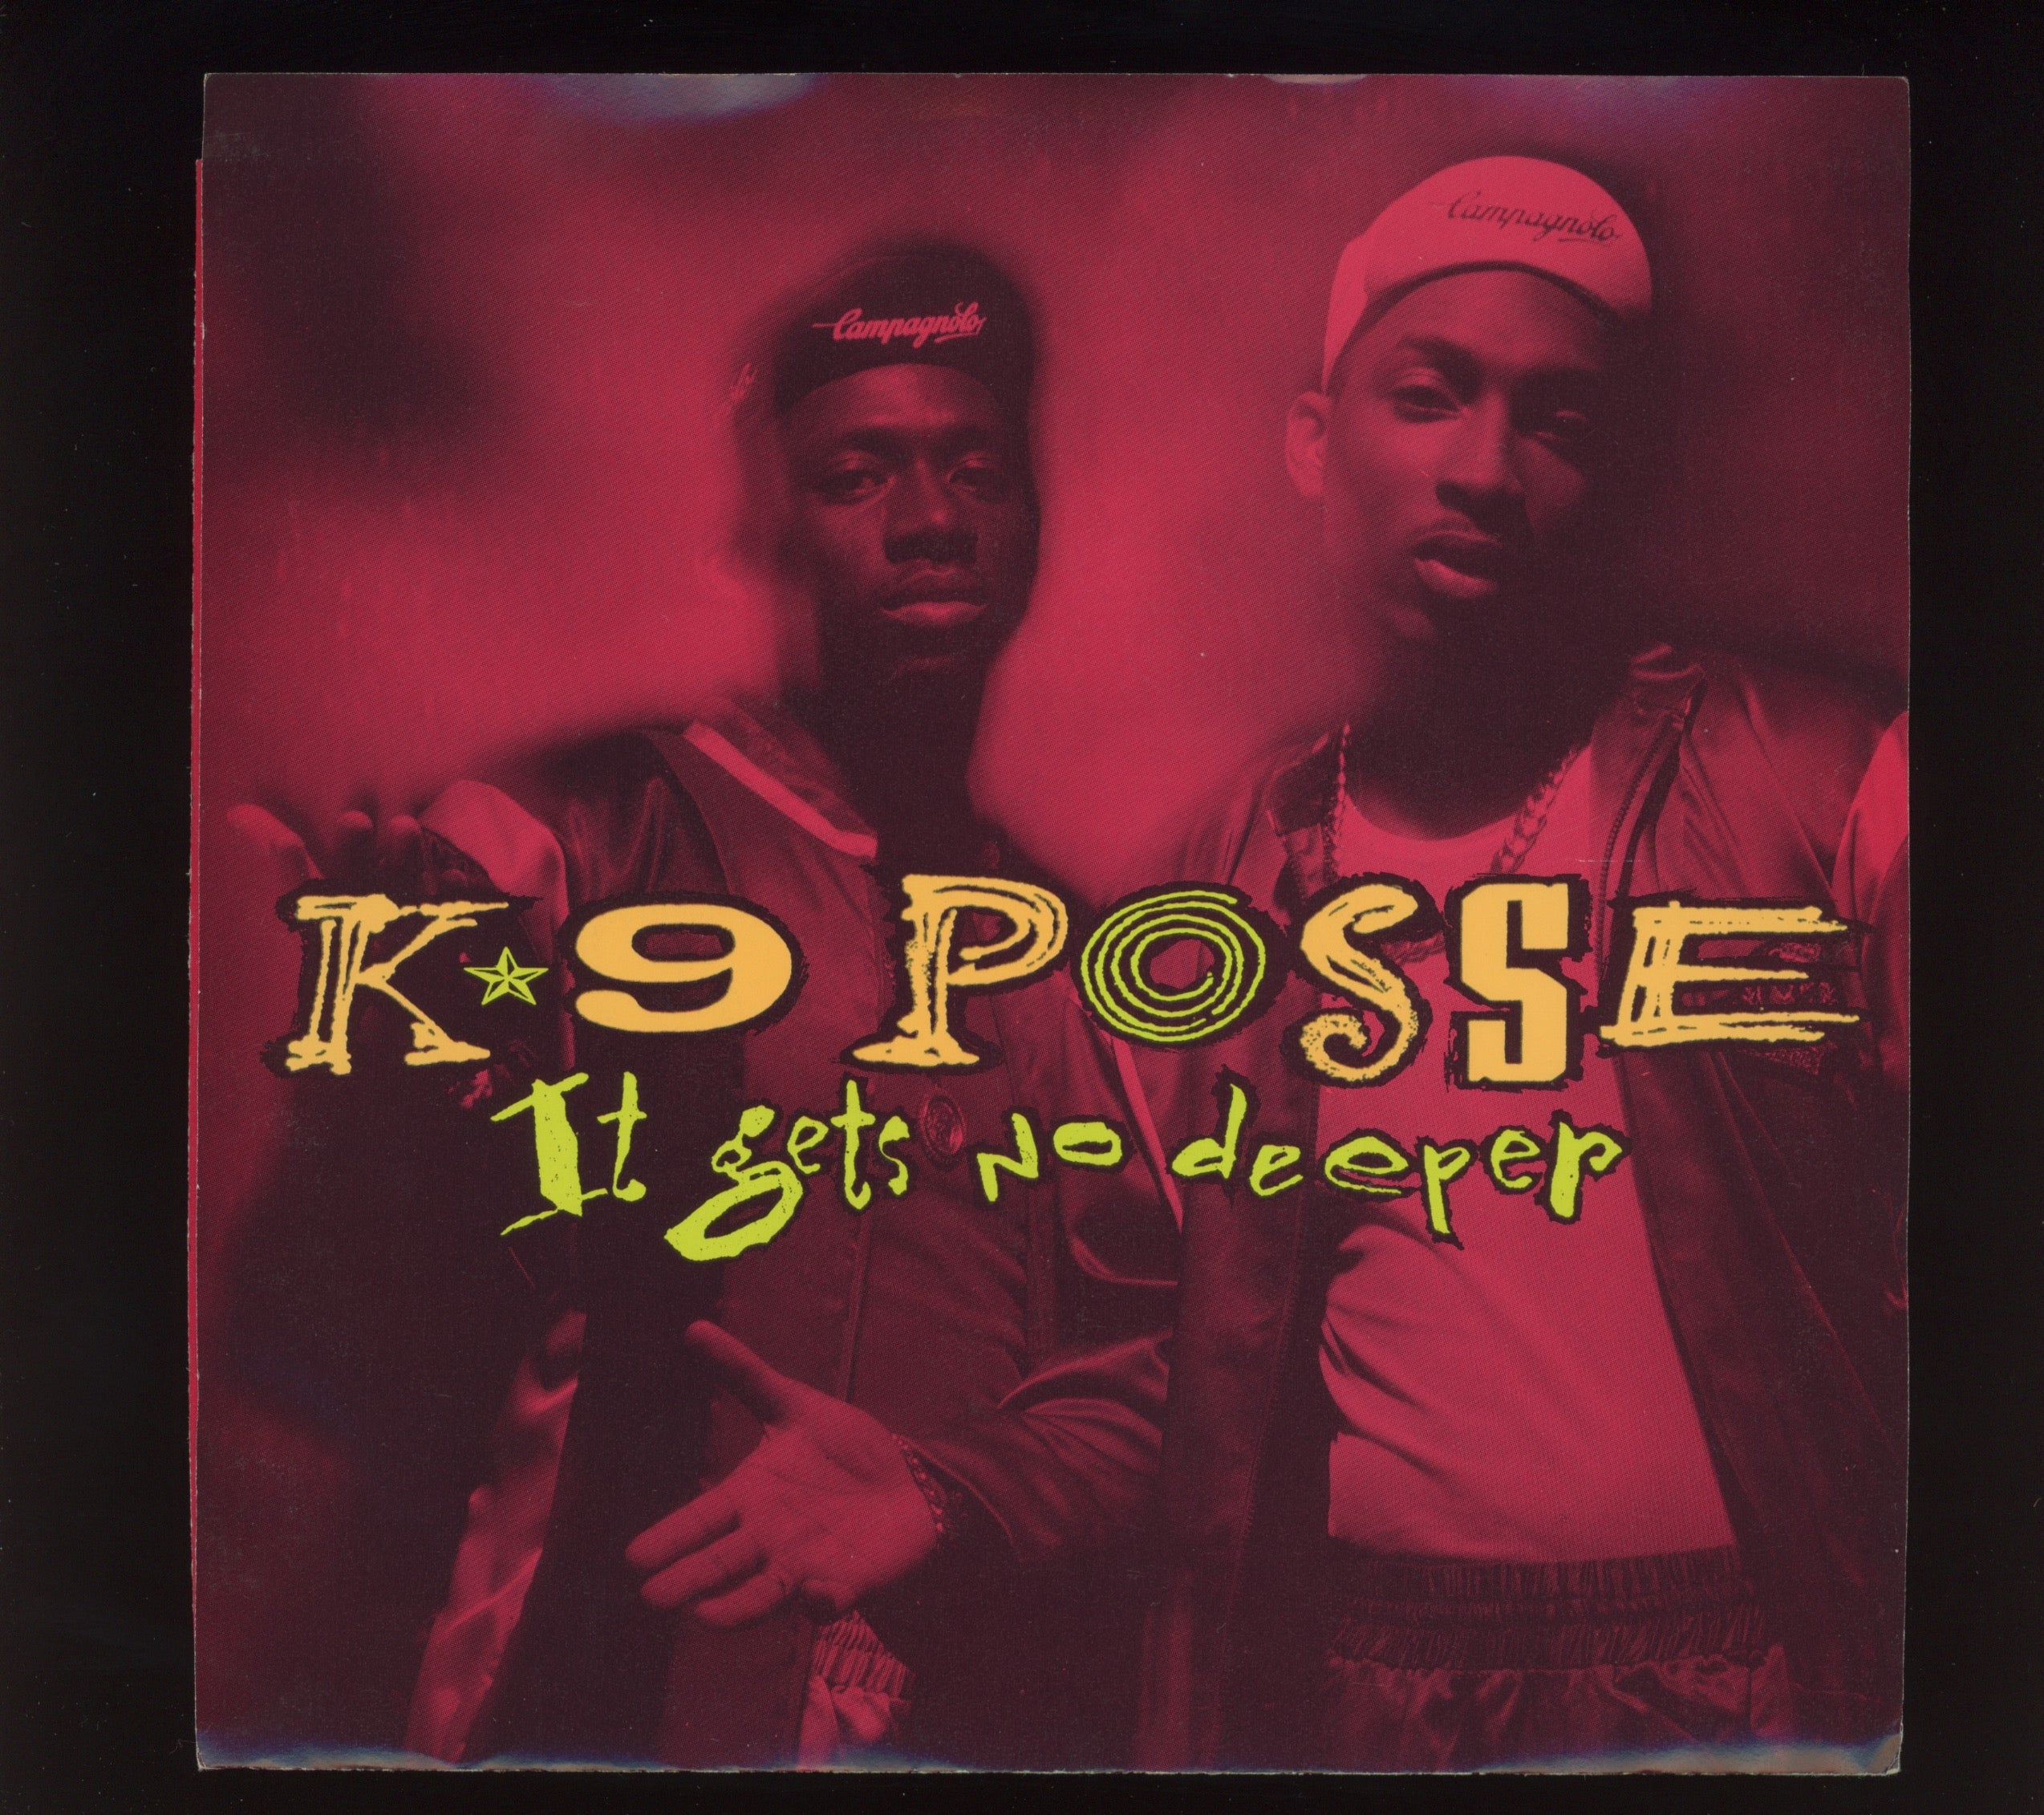 K-9 Posse - It Gets No Deeper on Arista With Picture Sleeve